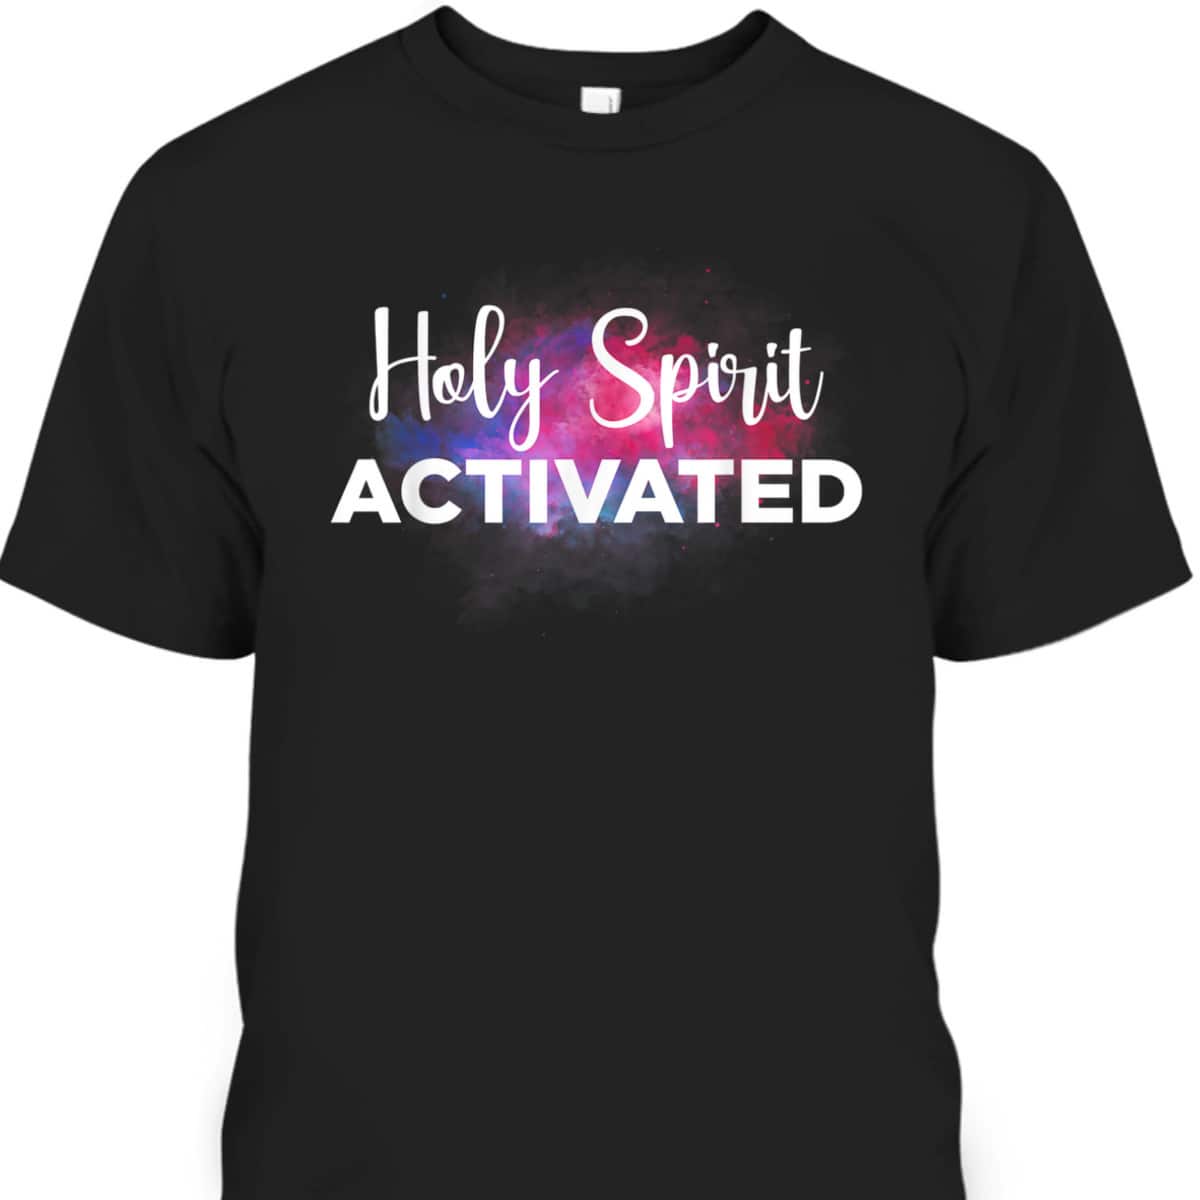 Holy Spirit Activate Funny Christian Religious T-Shirt For Friend